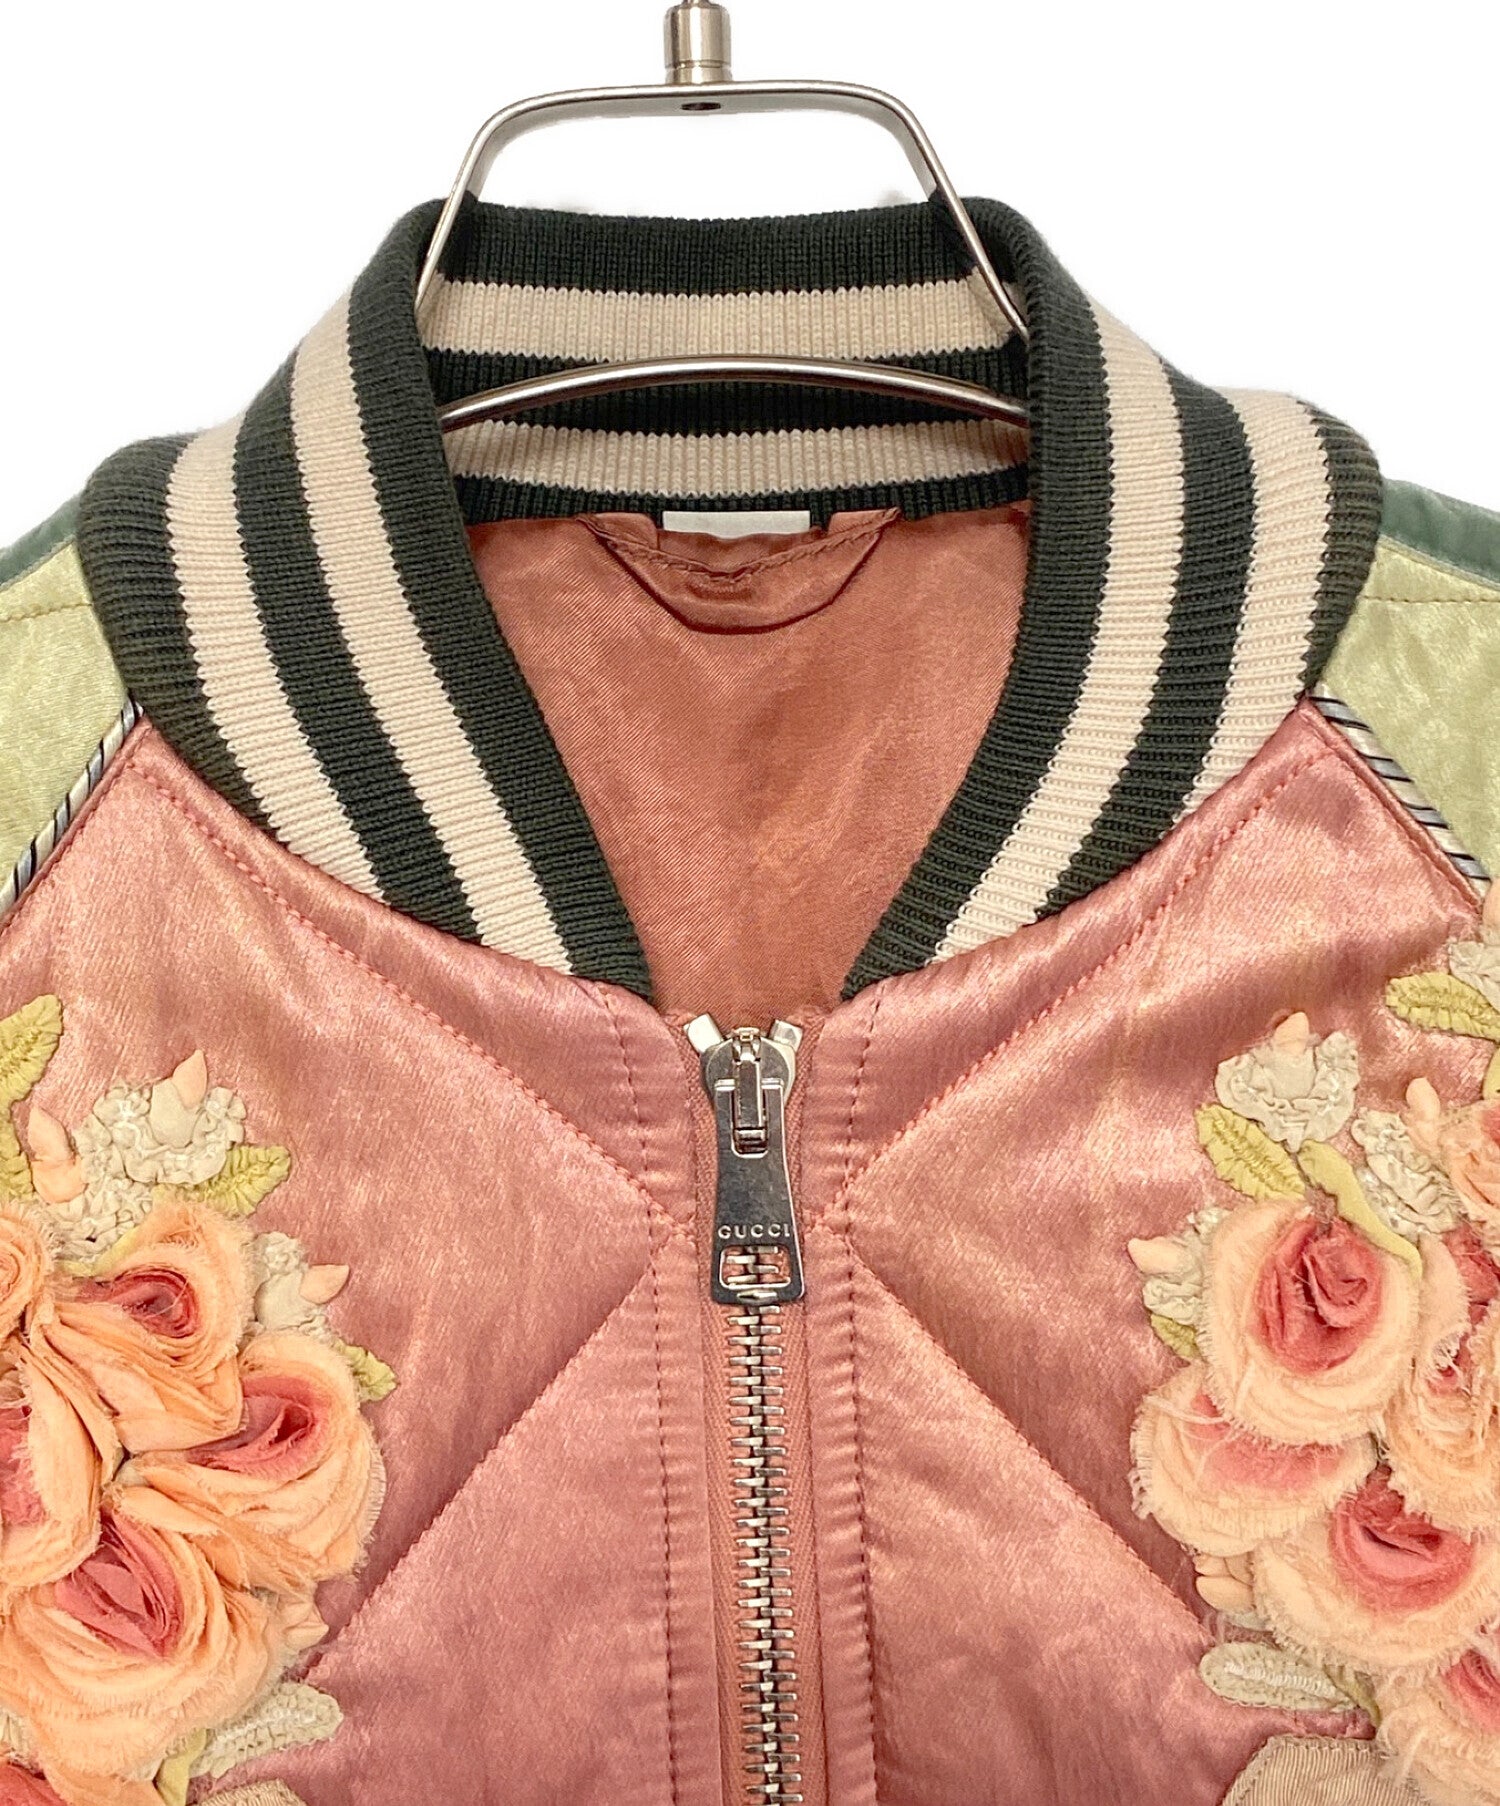 Archive Factory Gucci Shunga Embroidery Souvenir Jacket 502739 XR938